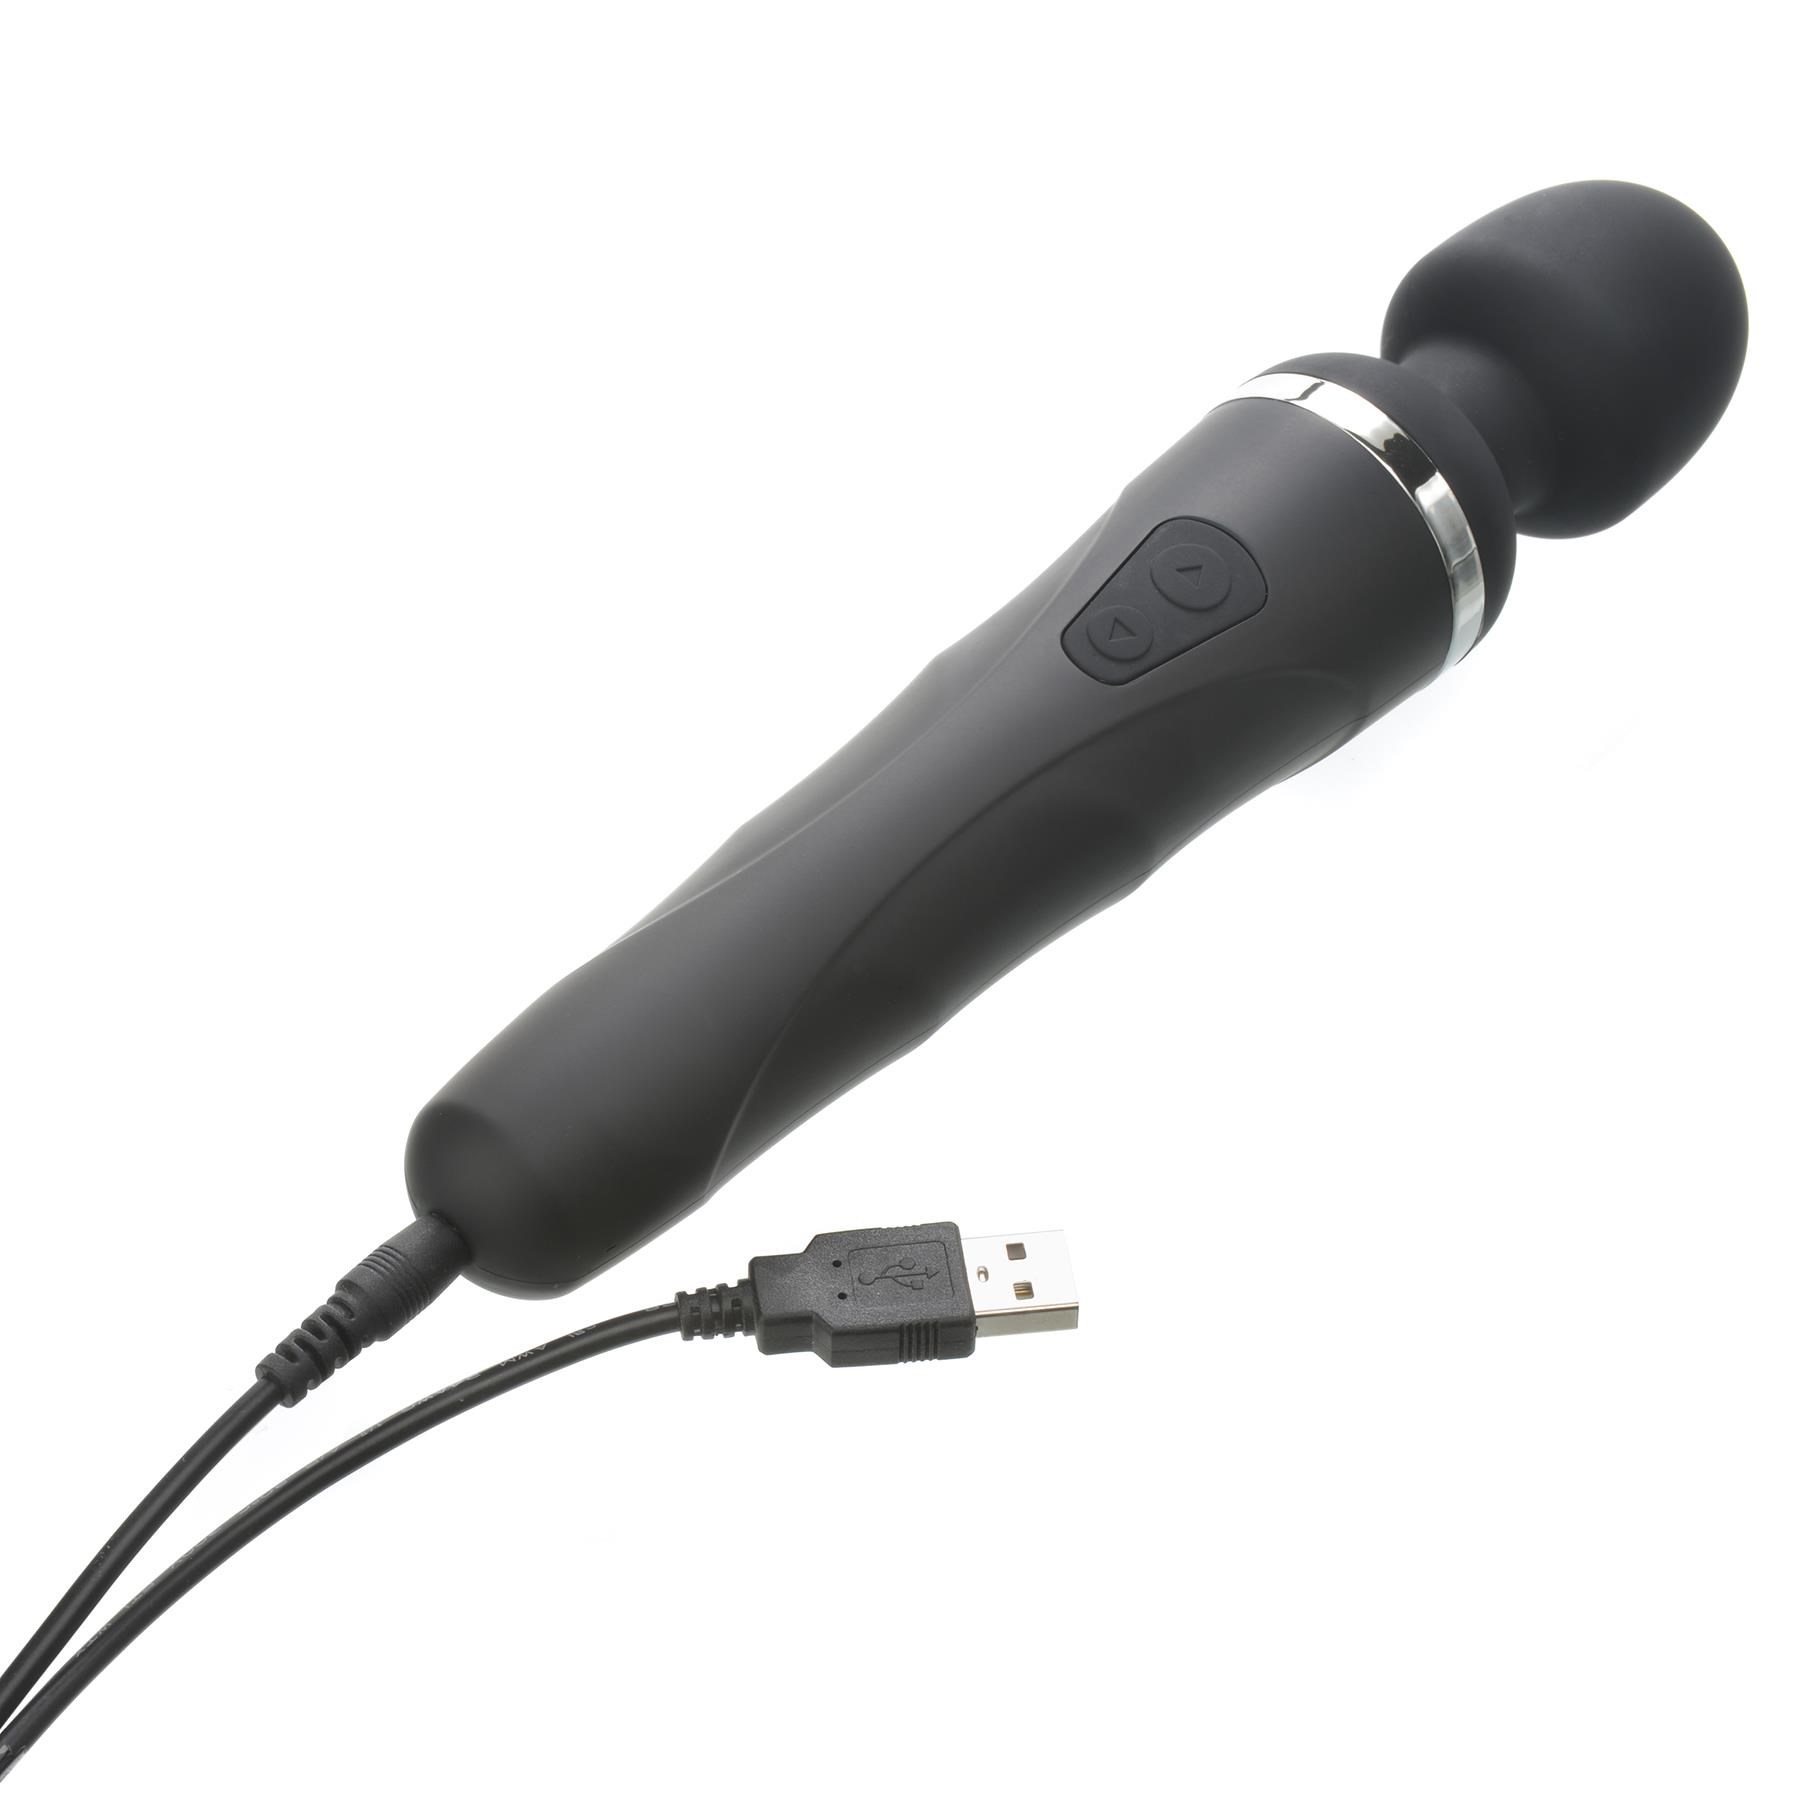 Lovense Domi 2 Bluetooth Wand Massager- Showing Where Charging Cable is Placed